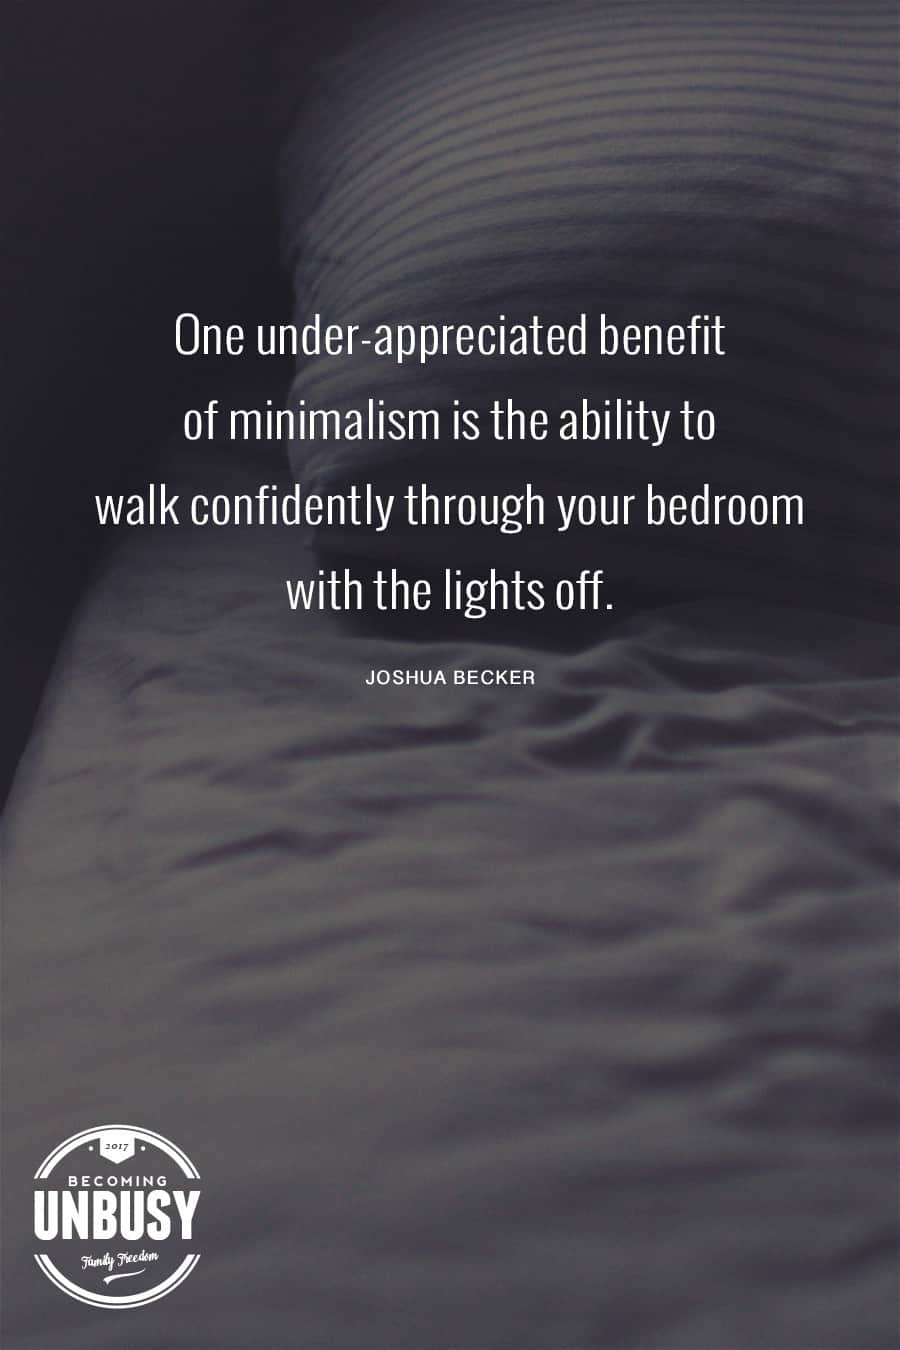 One under-appreciated benefit of minimalism is the ability to walk confidently through your bedroom with the lights off. - Joshua Becker #quote #minimalism #intentionalliving #becomingunbusy #joshuabecker *Loving this collection of quotes